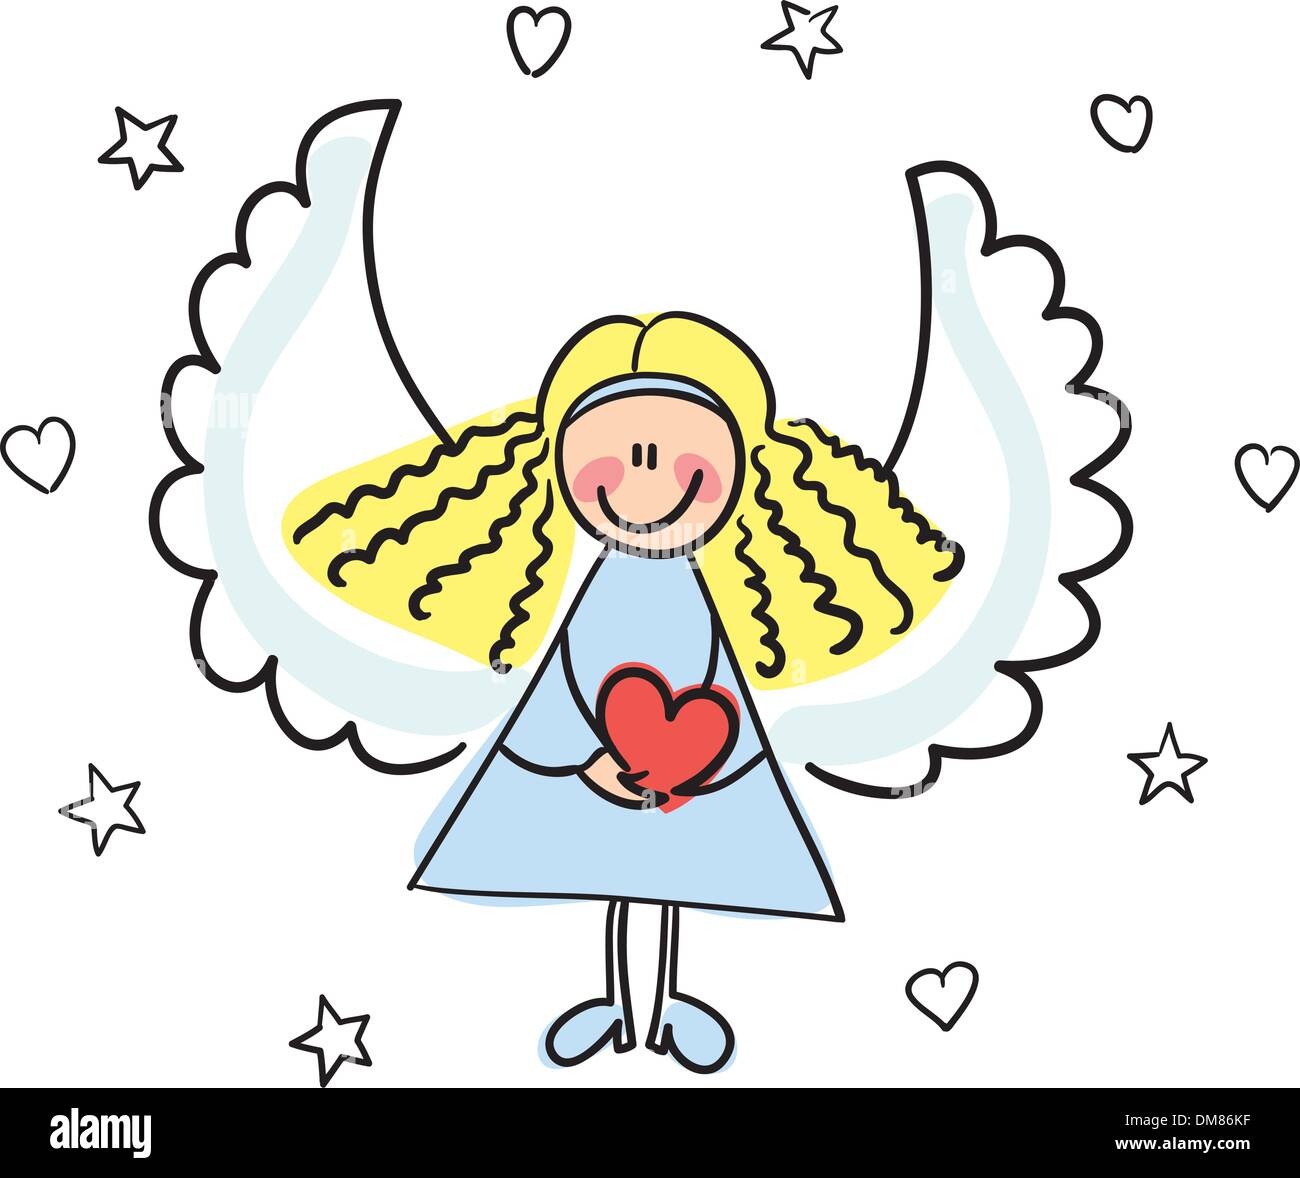 angel with heart vector illustration Stock Vector